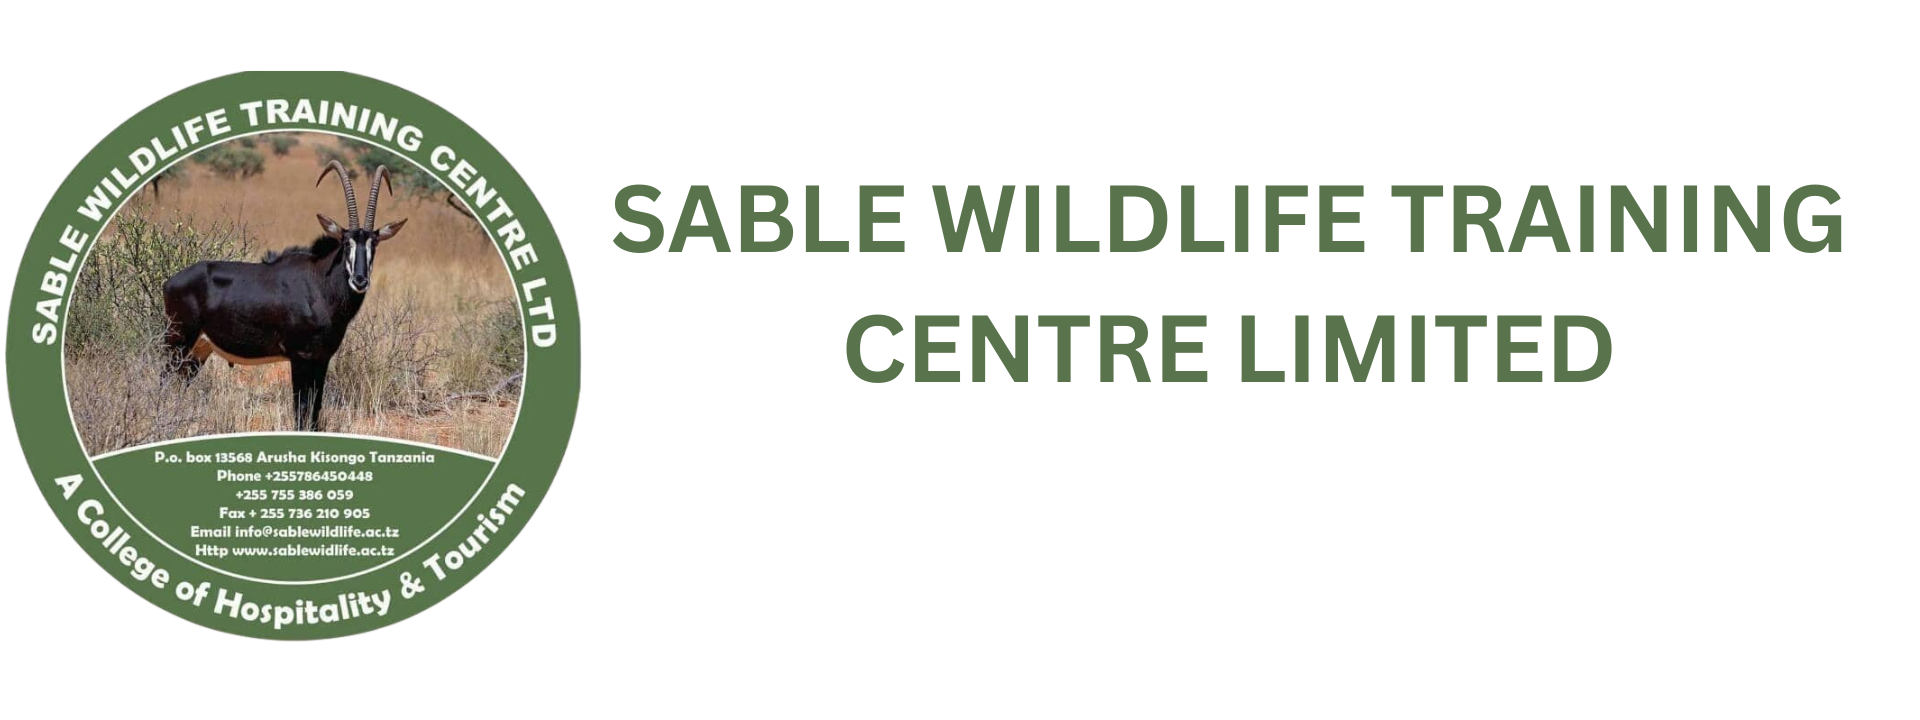 Sable Wildlife Training Centre Limited